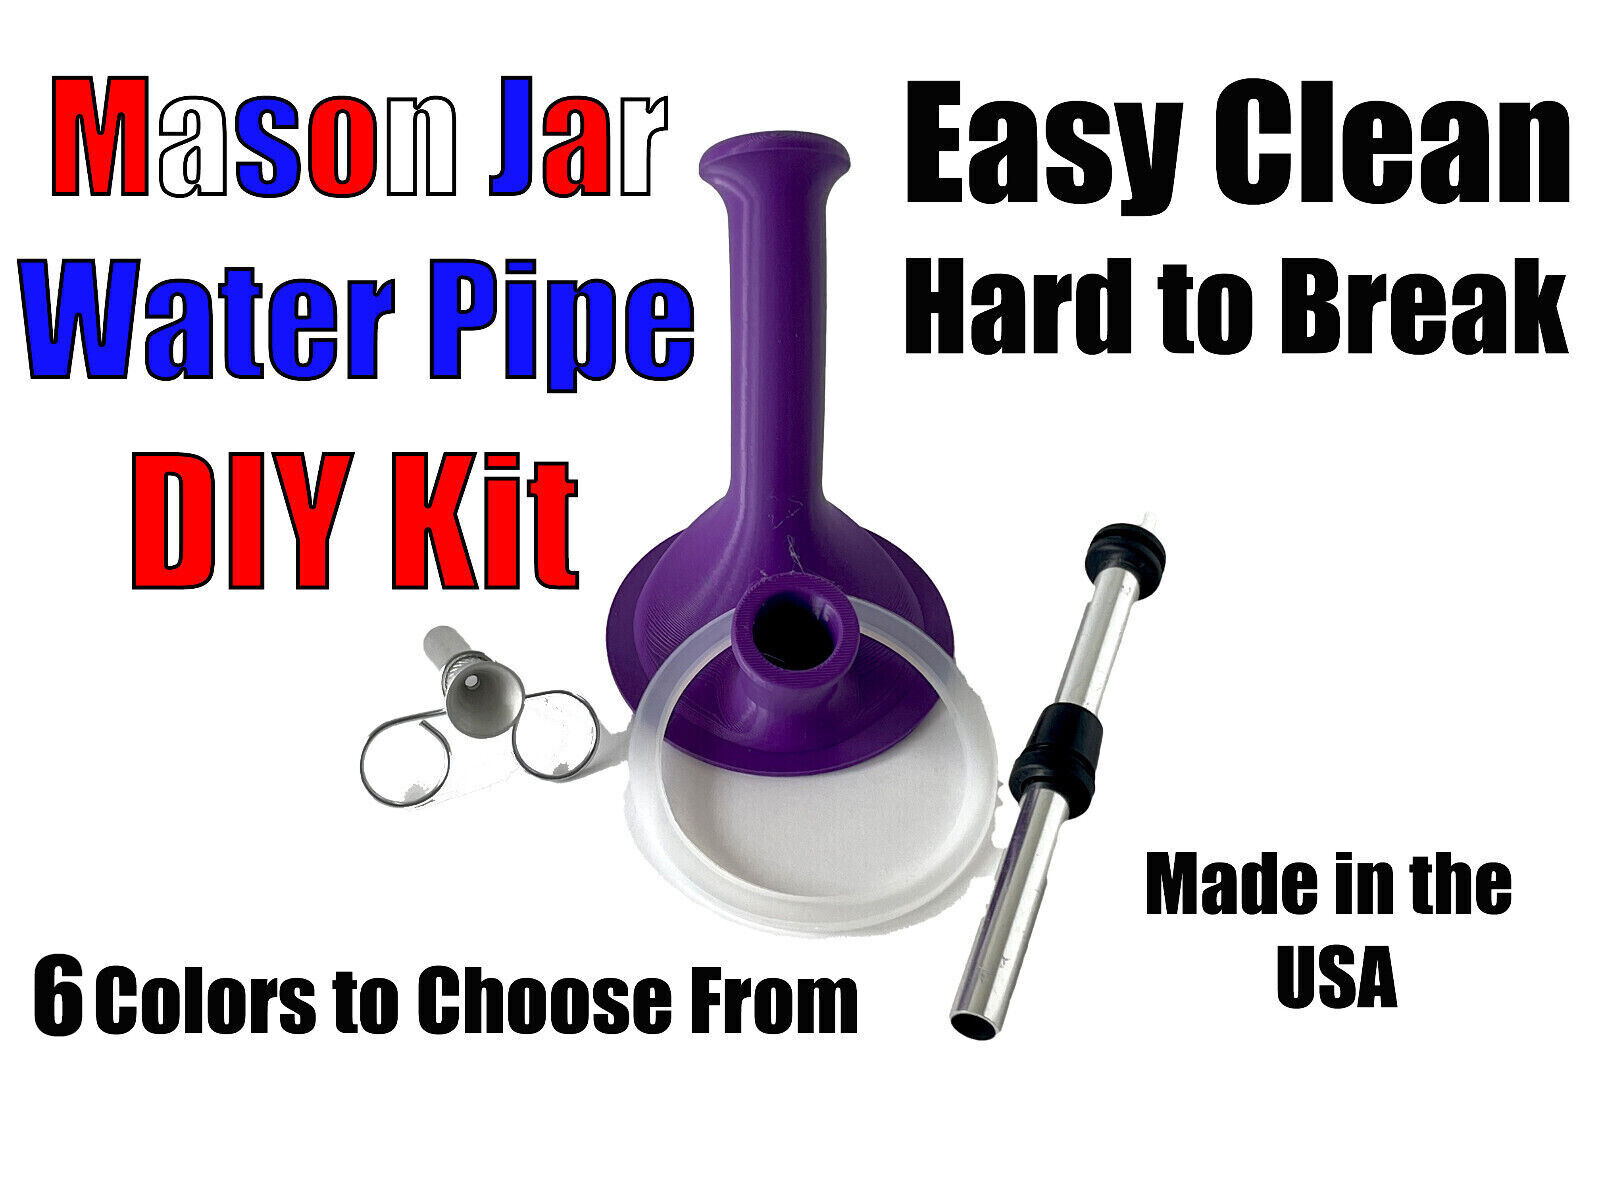 DYI Build Your Own Water Pipe -  Mason Jar - Glass Hookah - Easy Clean